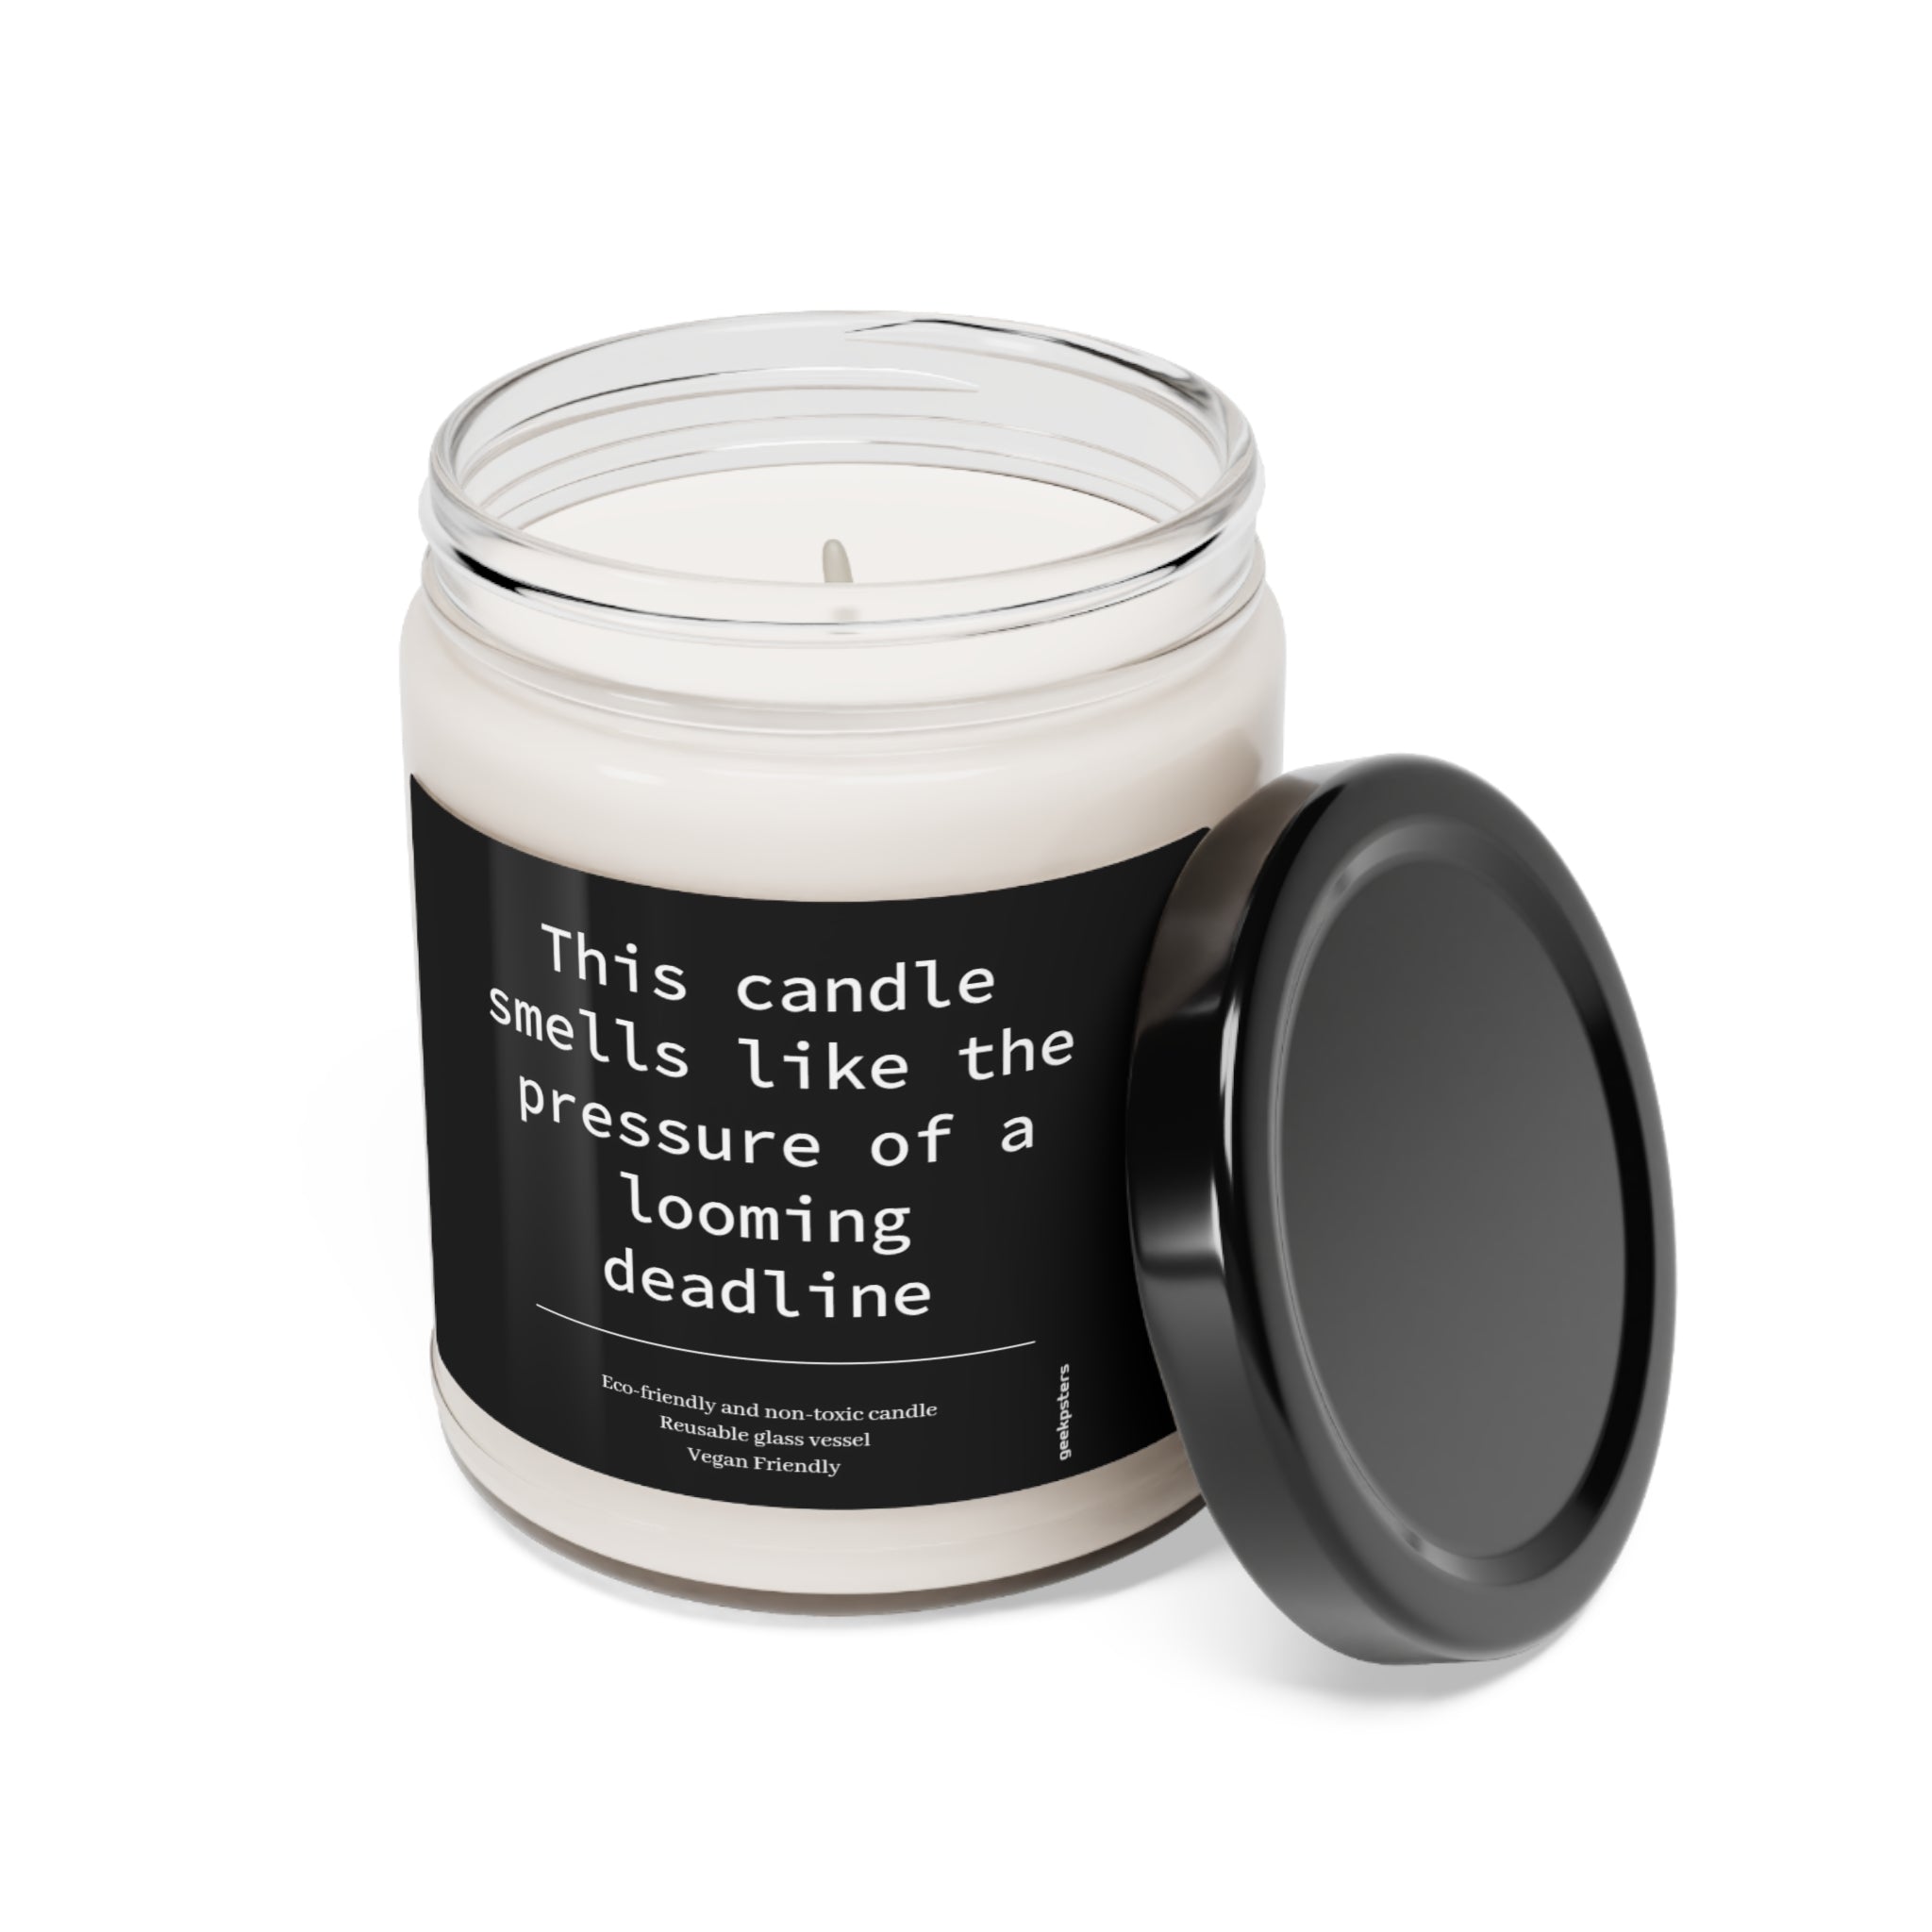 A This Candle Smells Like the Pressure of a Looming Deadline scented soy candle in a clear glass jar with a black lid, labeled "this candle smells like the pressure of a looming deadline.